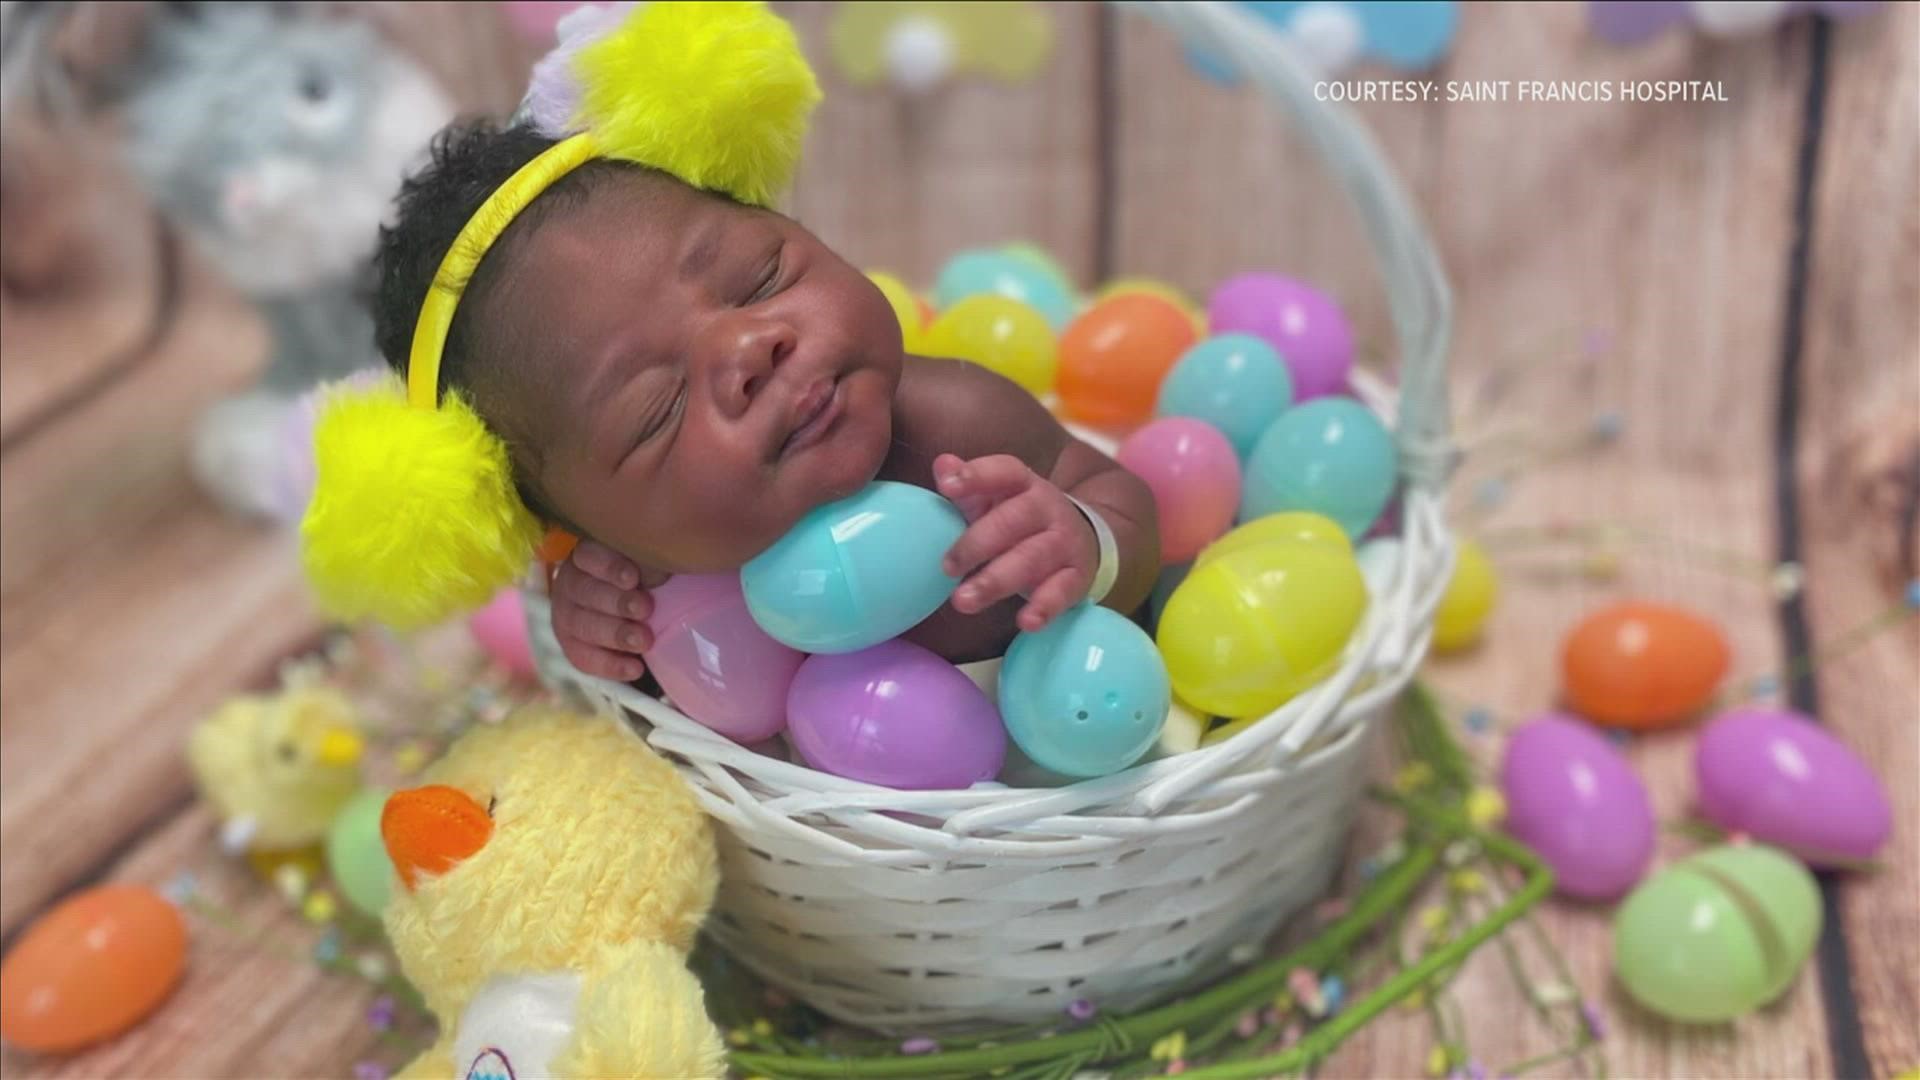 Every holiday, the nurses at hospitals in Memphis like to create a special day for the newborns in the NICU. This time, it's Easter!